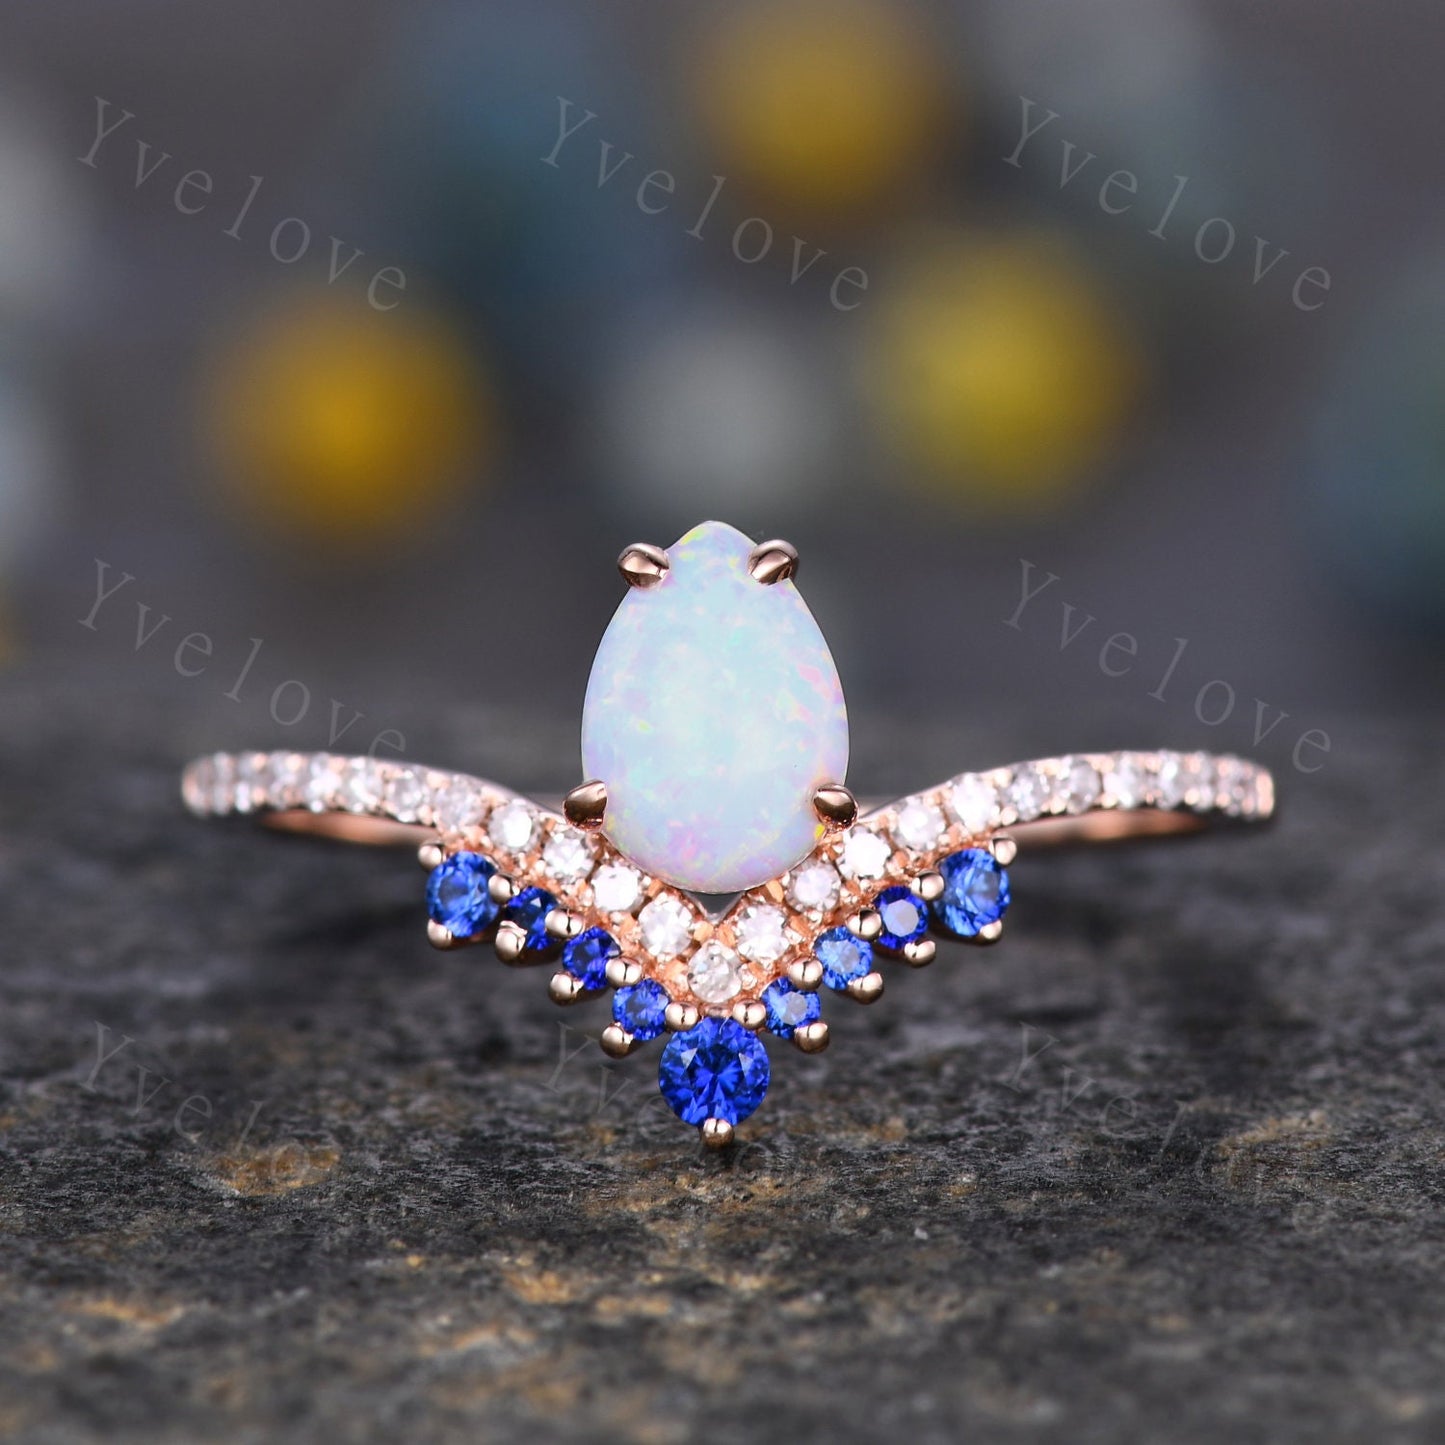 Vintage White Opal Engagement Ring,Opal Sapphire Bridal Ring Set,Pear Opal Ring,Curve Blue Sapphire Diamond Stacking Band,14k Rose Gold Ring